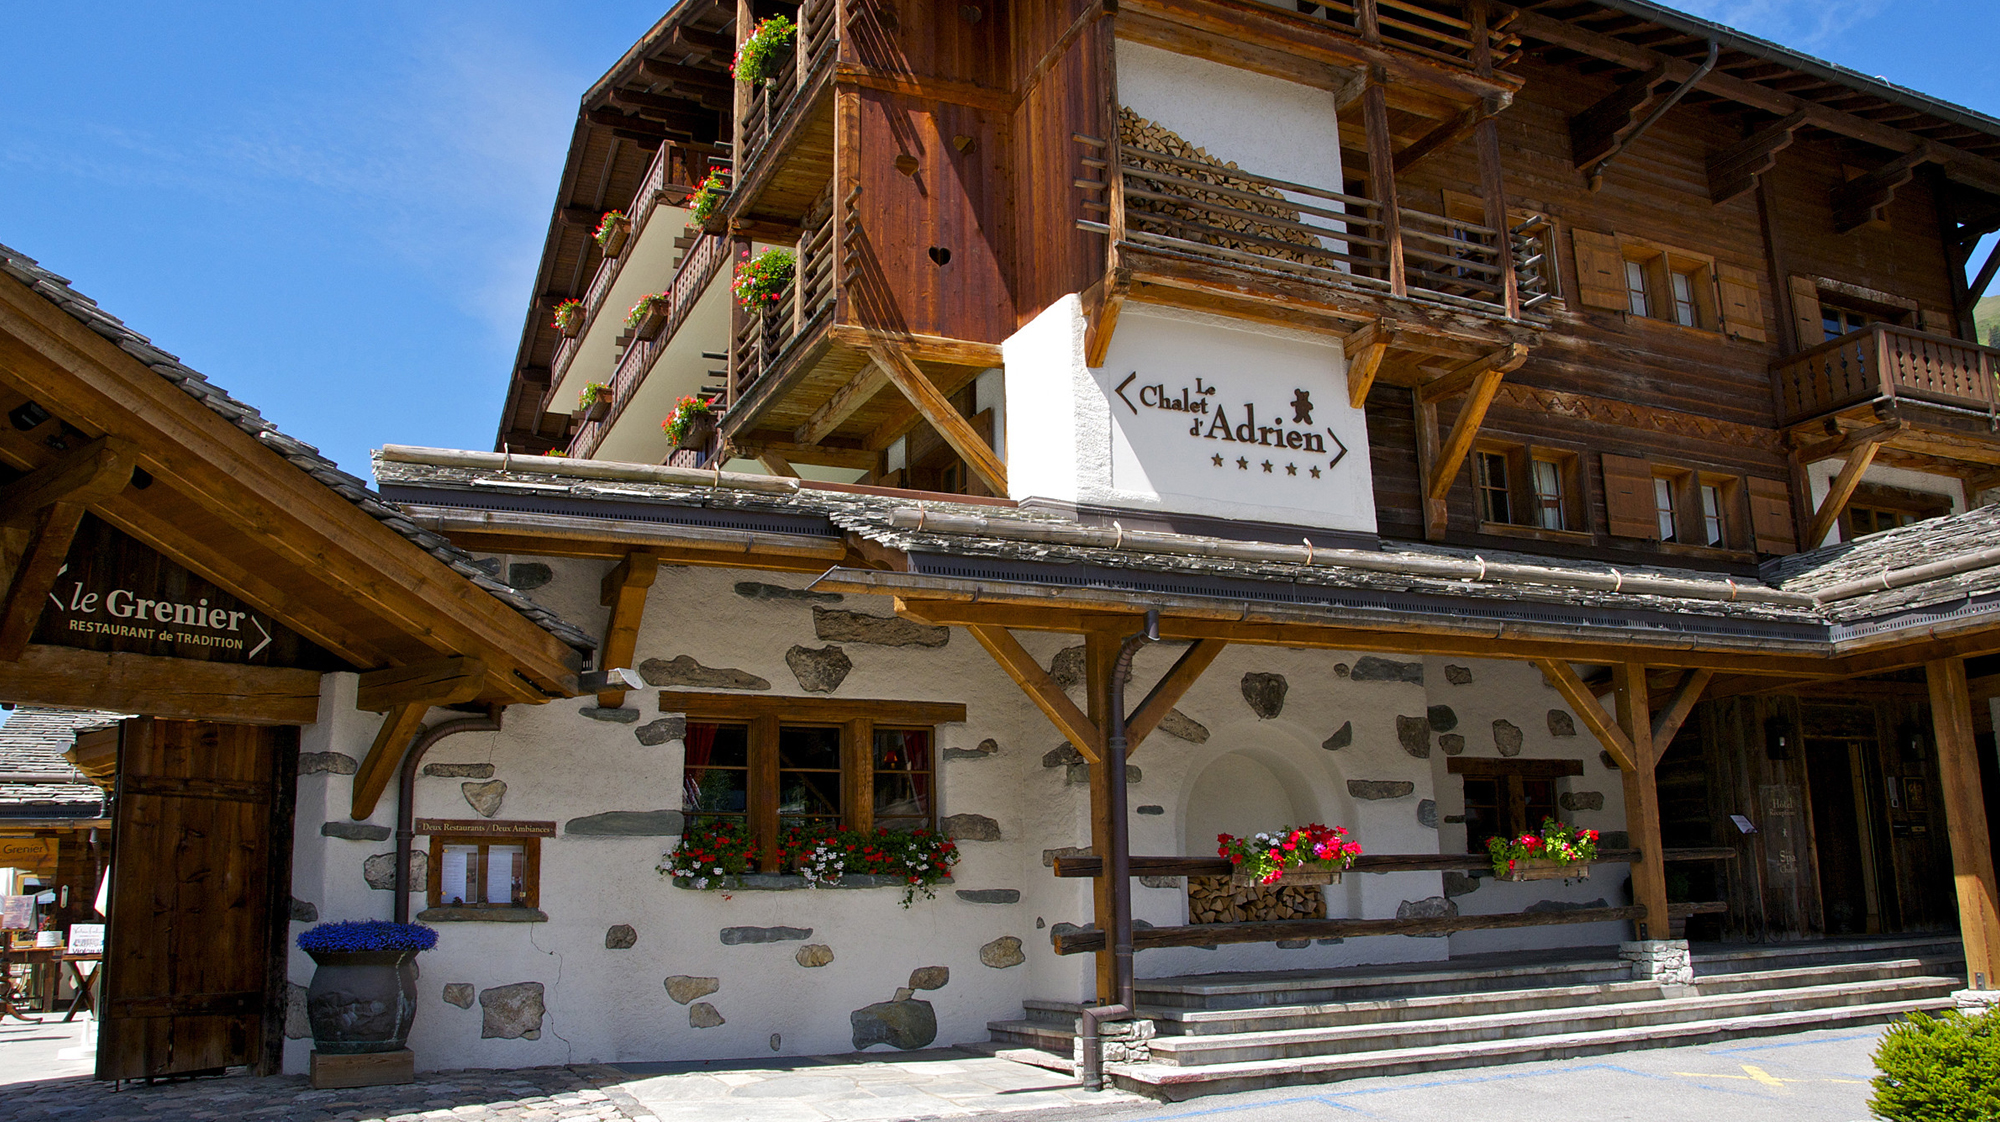 Summer time in the Chalet d'Adrien